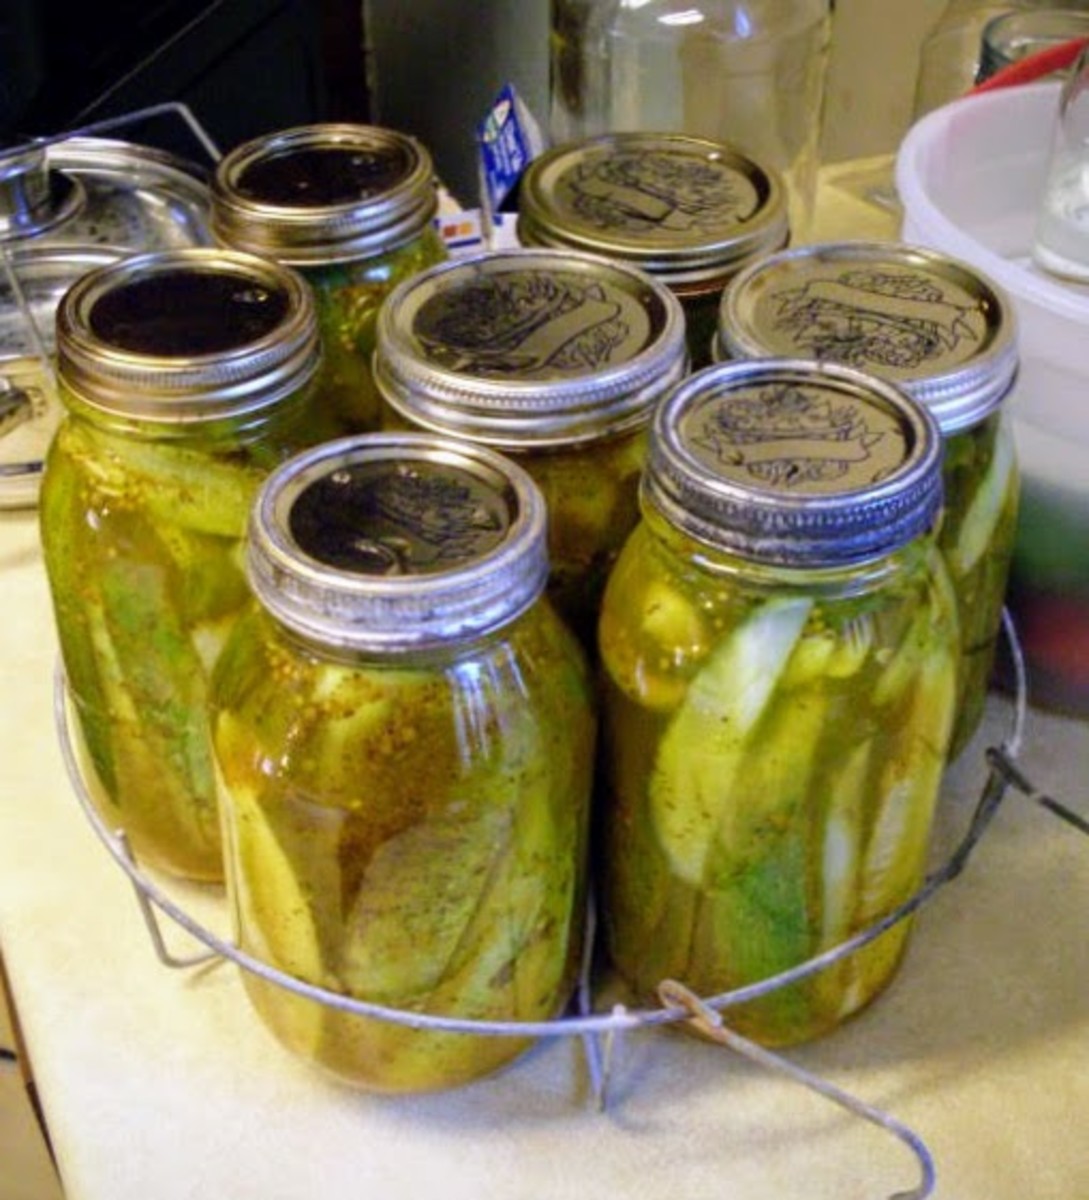 Place jars into canner rack, or set aside to be placed individually in canner.